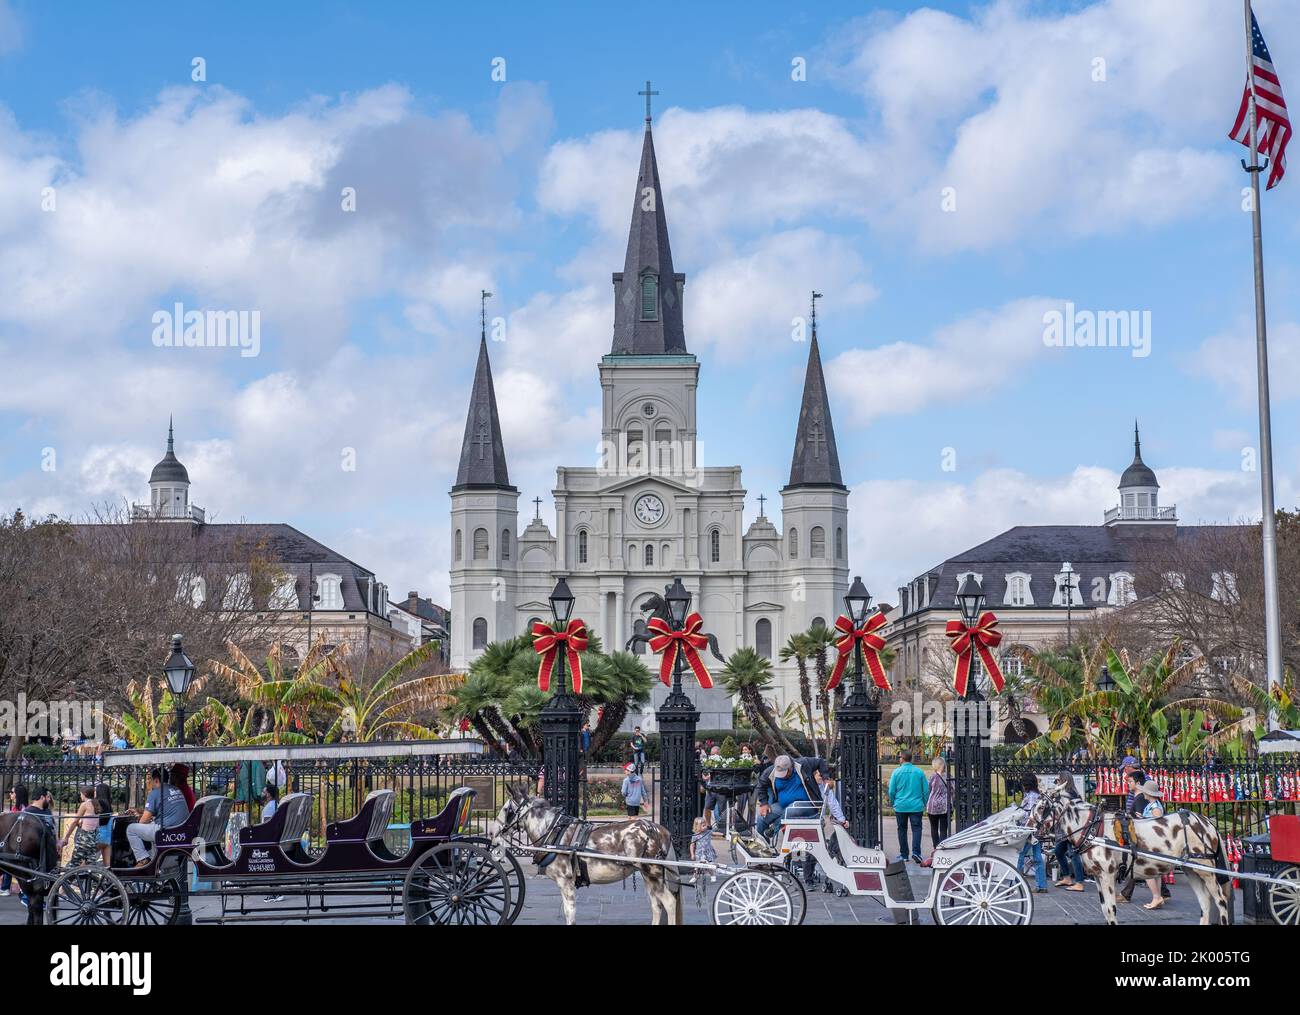 NEW ORLEANS, LA, USA - NOVEMBER 30, 2019: Cityscape of St. Louis Cathedral, the Cabildo, the Presbytere, mule-drawn carriages, and Christmas decor Stock Photo